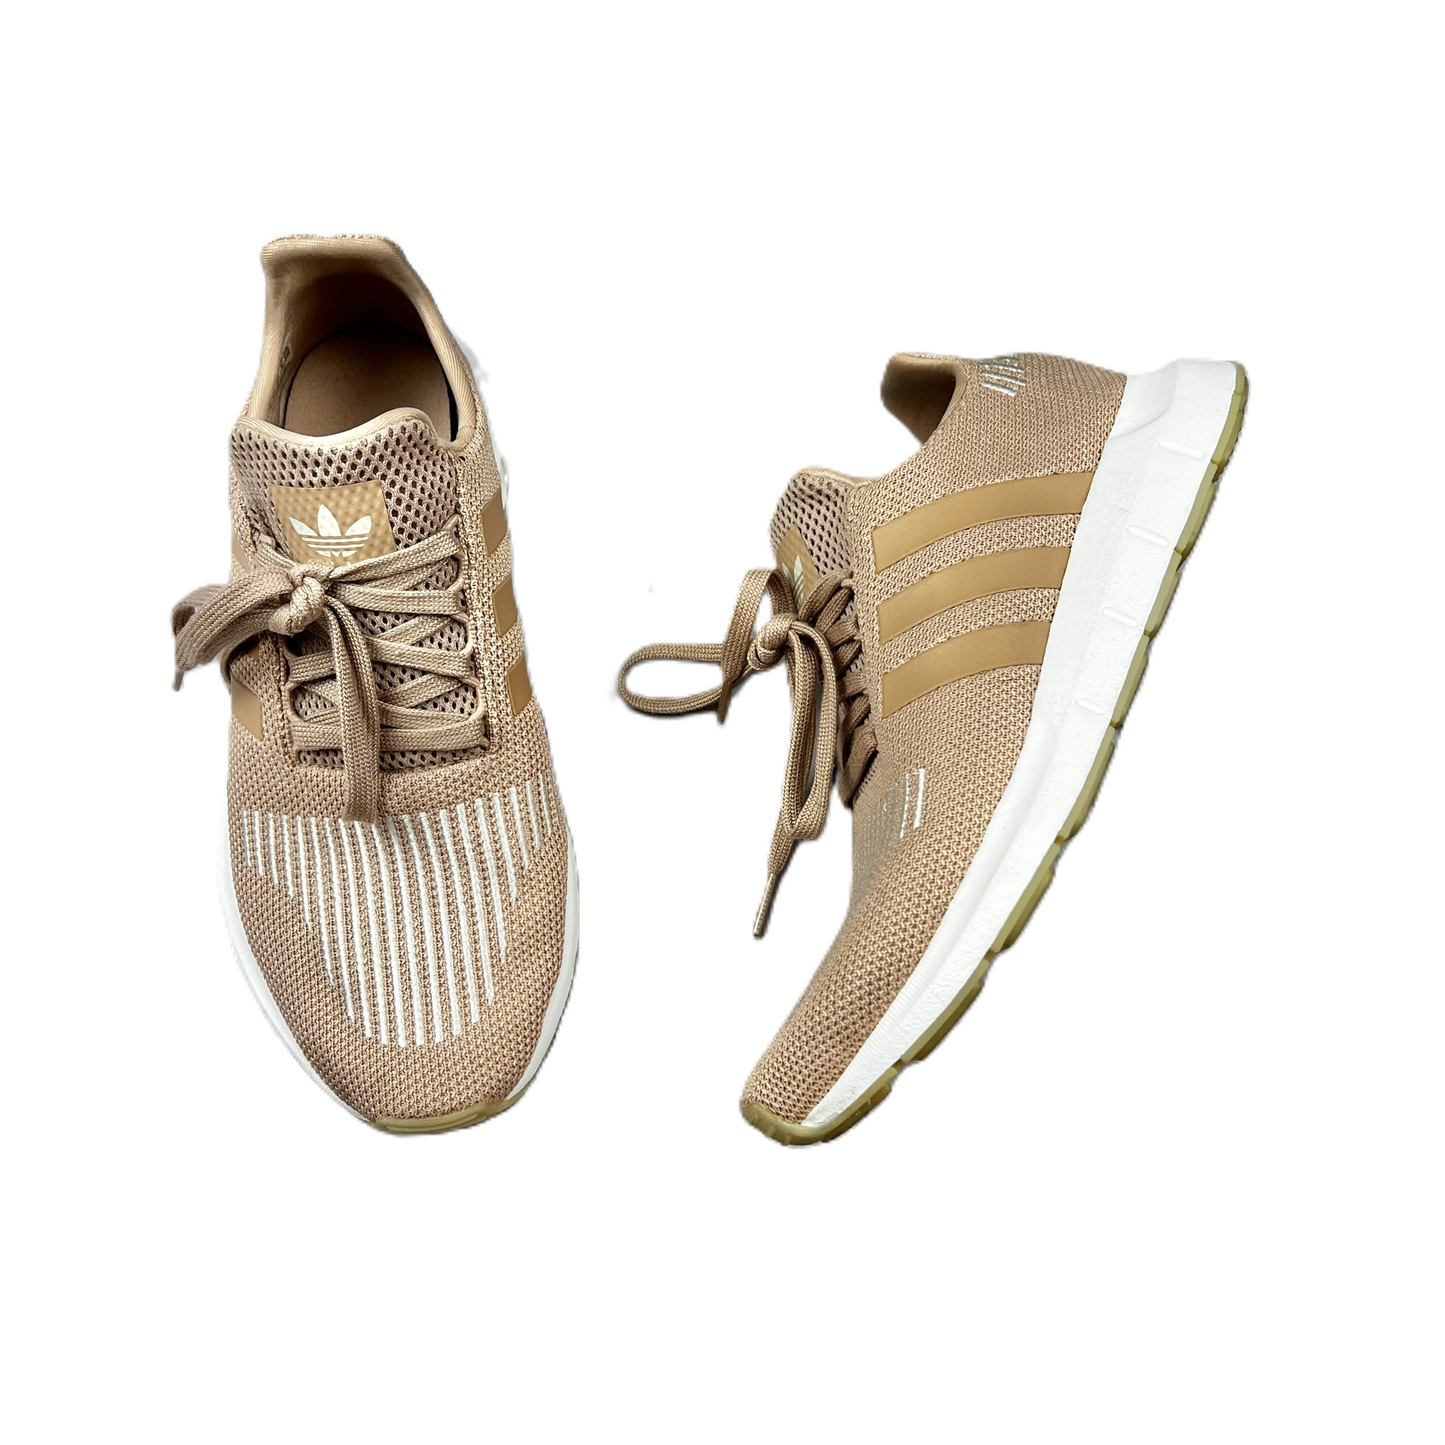 Tan Shoes Athletic By Adidas, Size: 7.5